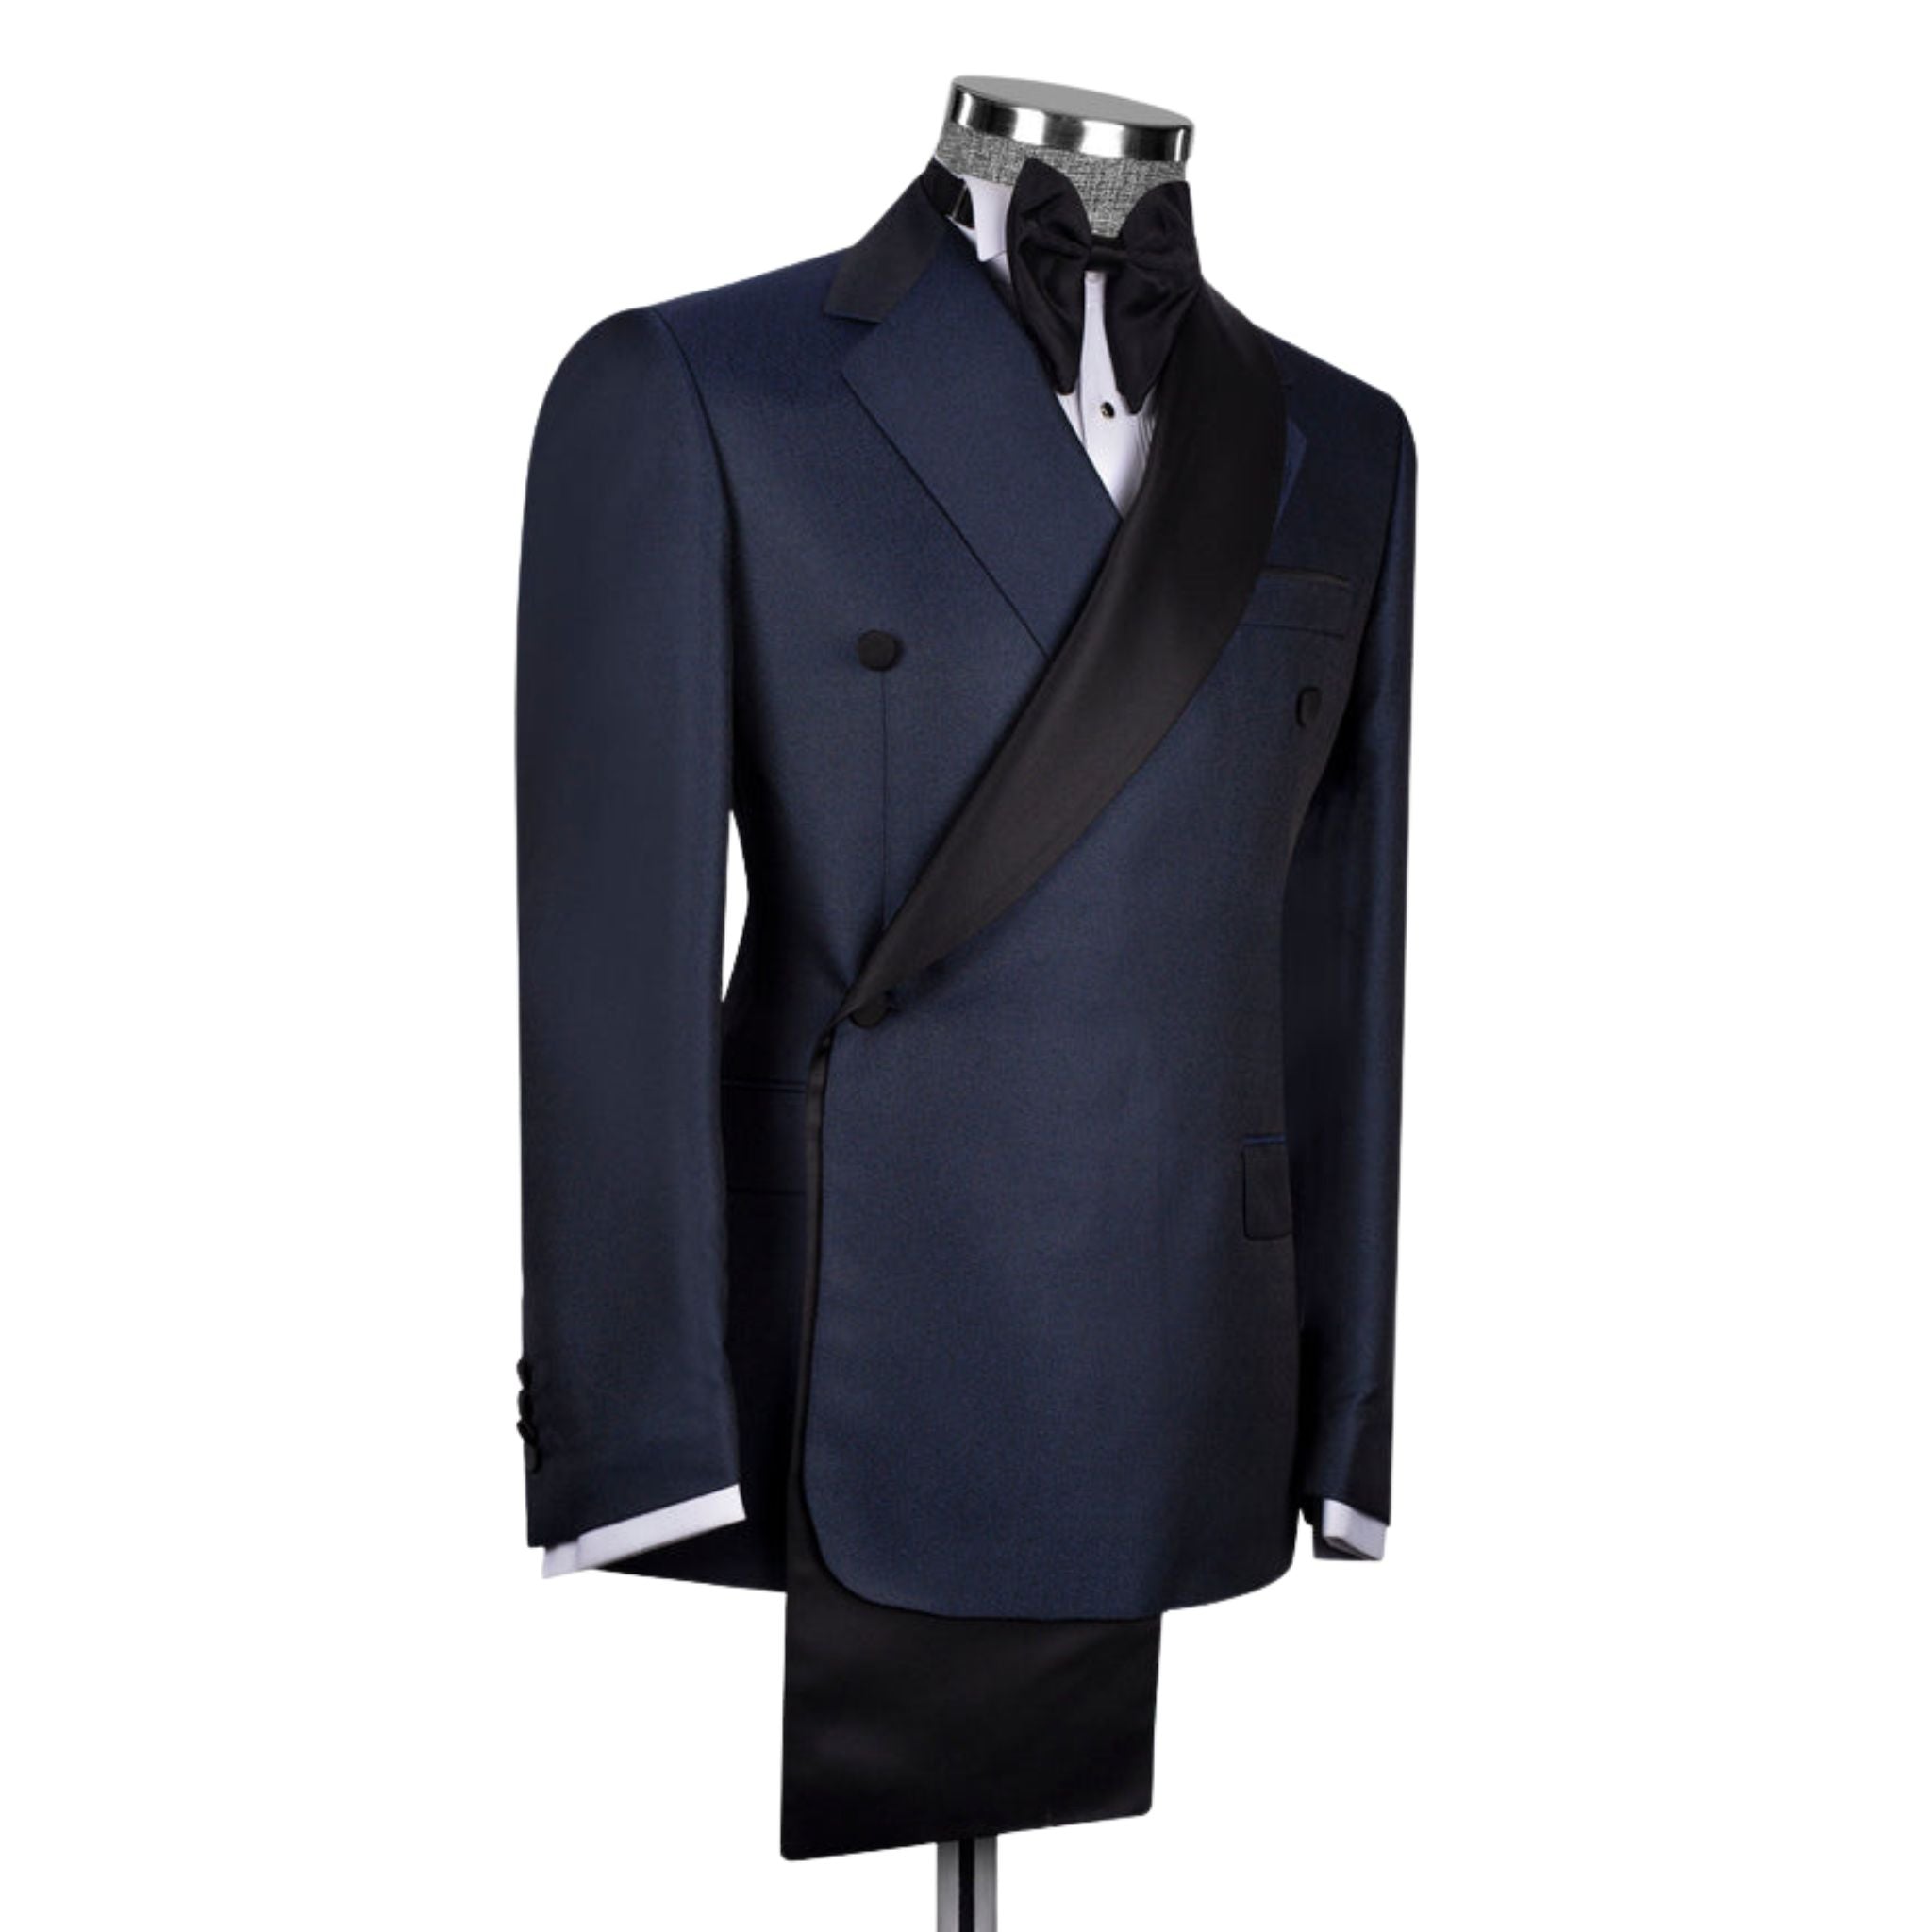 Men's Elite Collection Notch and Shawl Lapel Double Breasted Tuxedo in Navy Blue and Black - Maison de Kingsley Couture Harmonie et Fureur Spain